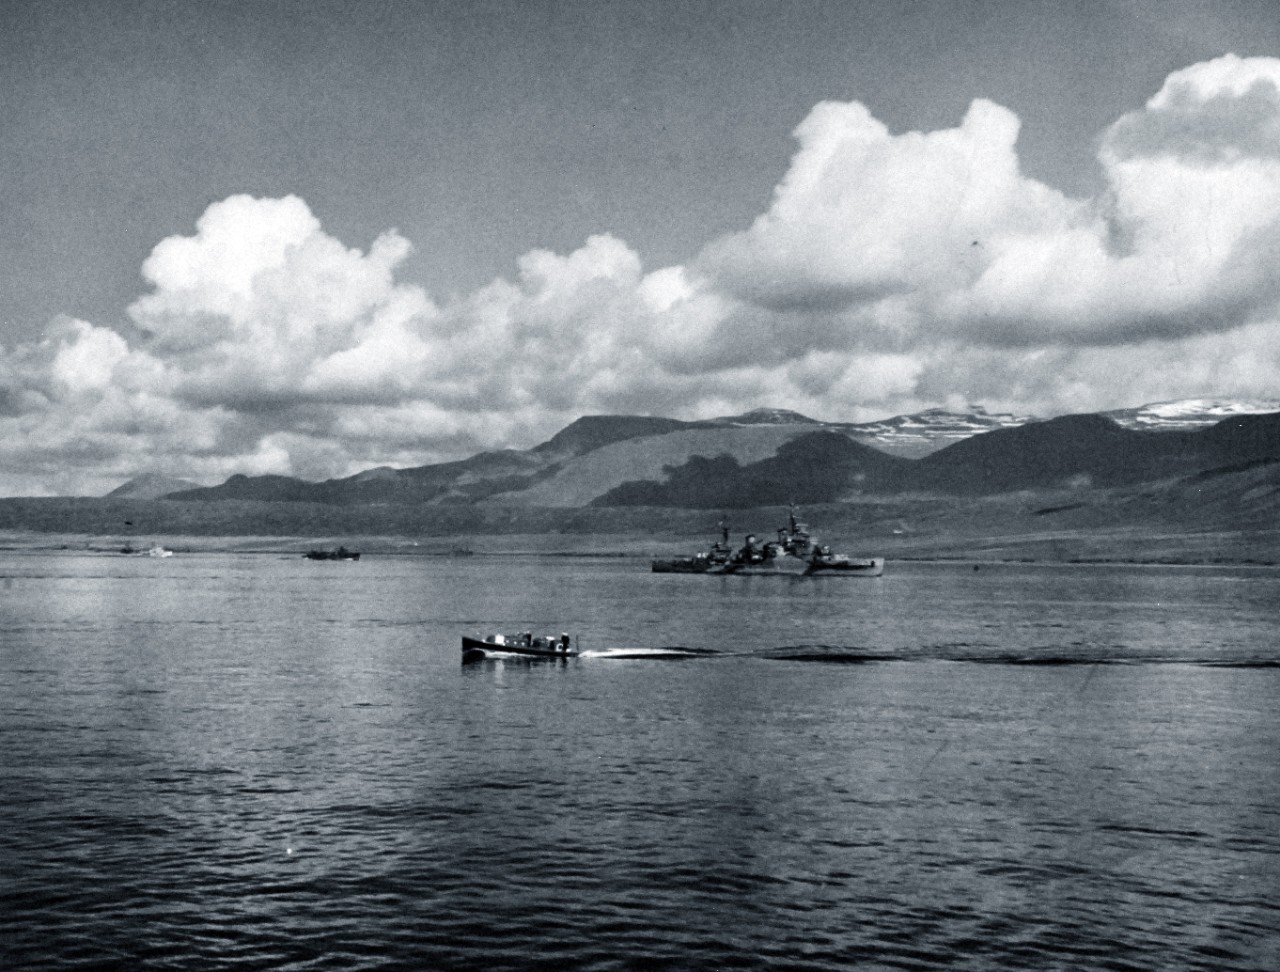 <p>80-G-24828: PQ-17 Arctic Convoy, June-July 1942. The covering forces of the PQ-17 Convoy (British and American ships) at anchor in the harbor at Hvalfjord, Iceland.&nbsp;</p>
